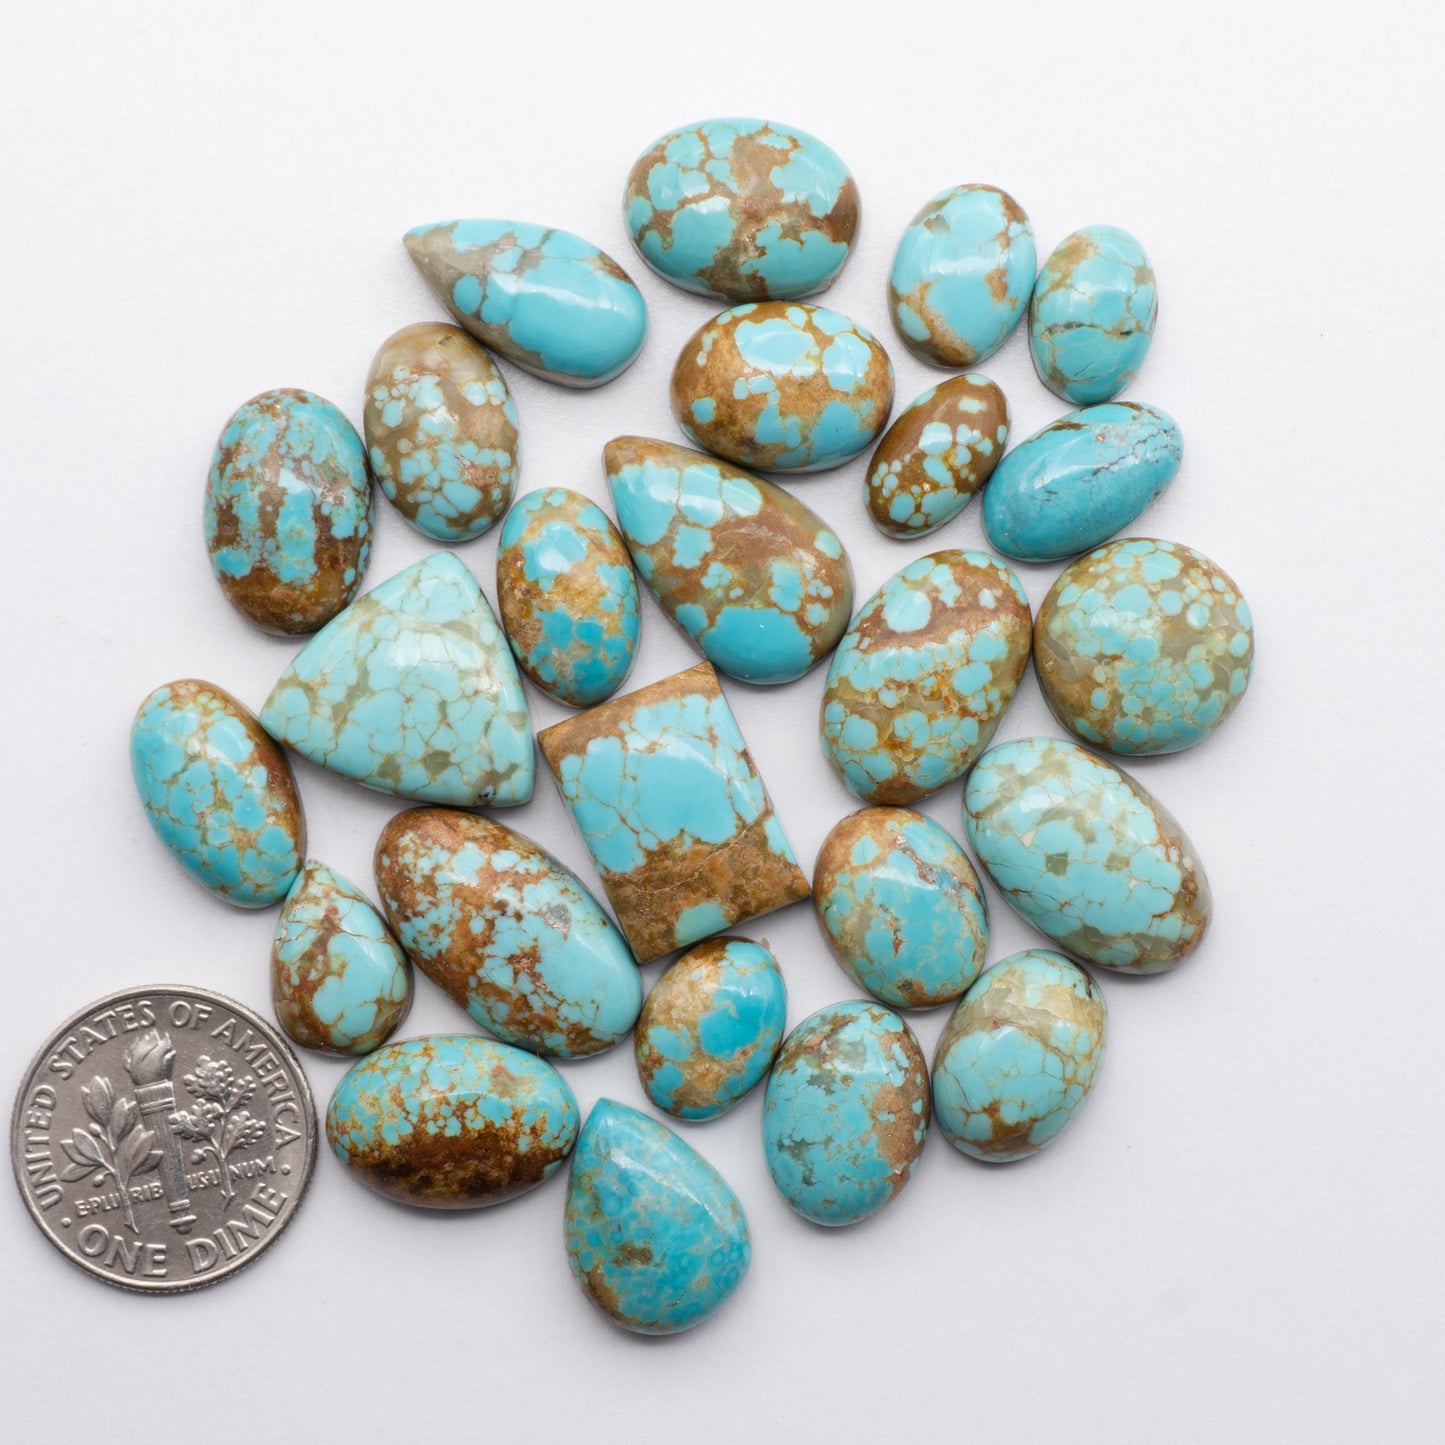 Number 8 Turquoise is mined in Nevada, USA. Number 8 Cabochons have a glossy finish and are backed for added strength perfect for jewelry making.